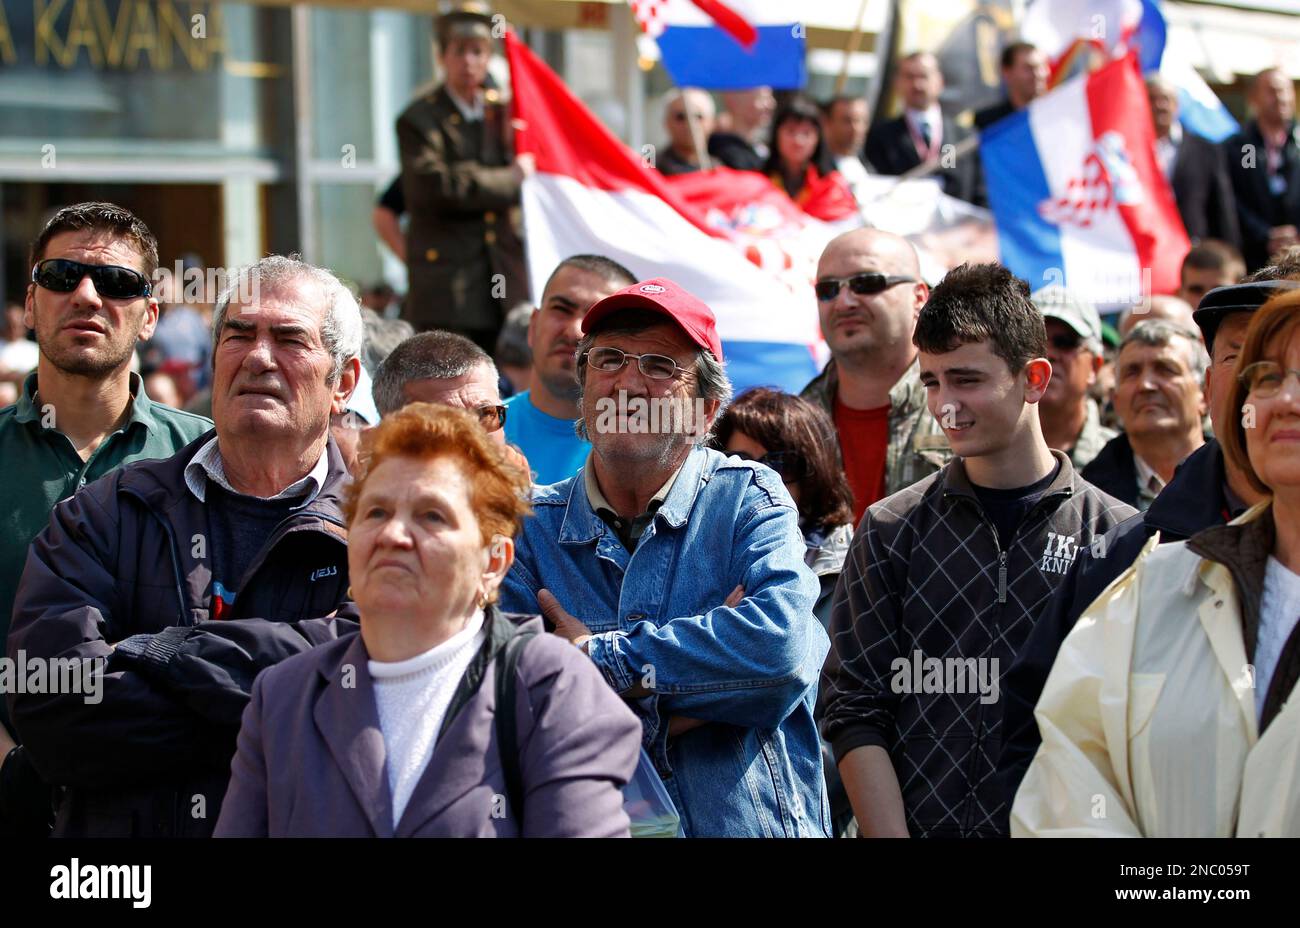 People watch a live broadcast of the verdict from the Yugoslav war crimes tribunal in The Hague at the main square in Zagreb, Croatia, Friday, April 15, 2011. A U.N. court has convicted a key wartime Croatian commander, Gen. Ante Gotovina, of committing atrocities in a campaign of shelling, murder and persecution aimed at driving Serbs out of Croatia's Krajina border region in 1995. (AP Photo/Darko Bandic) Stockfoto